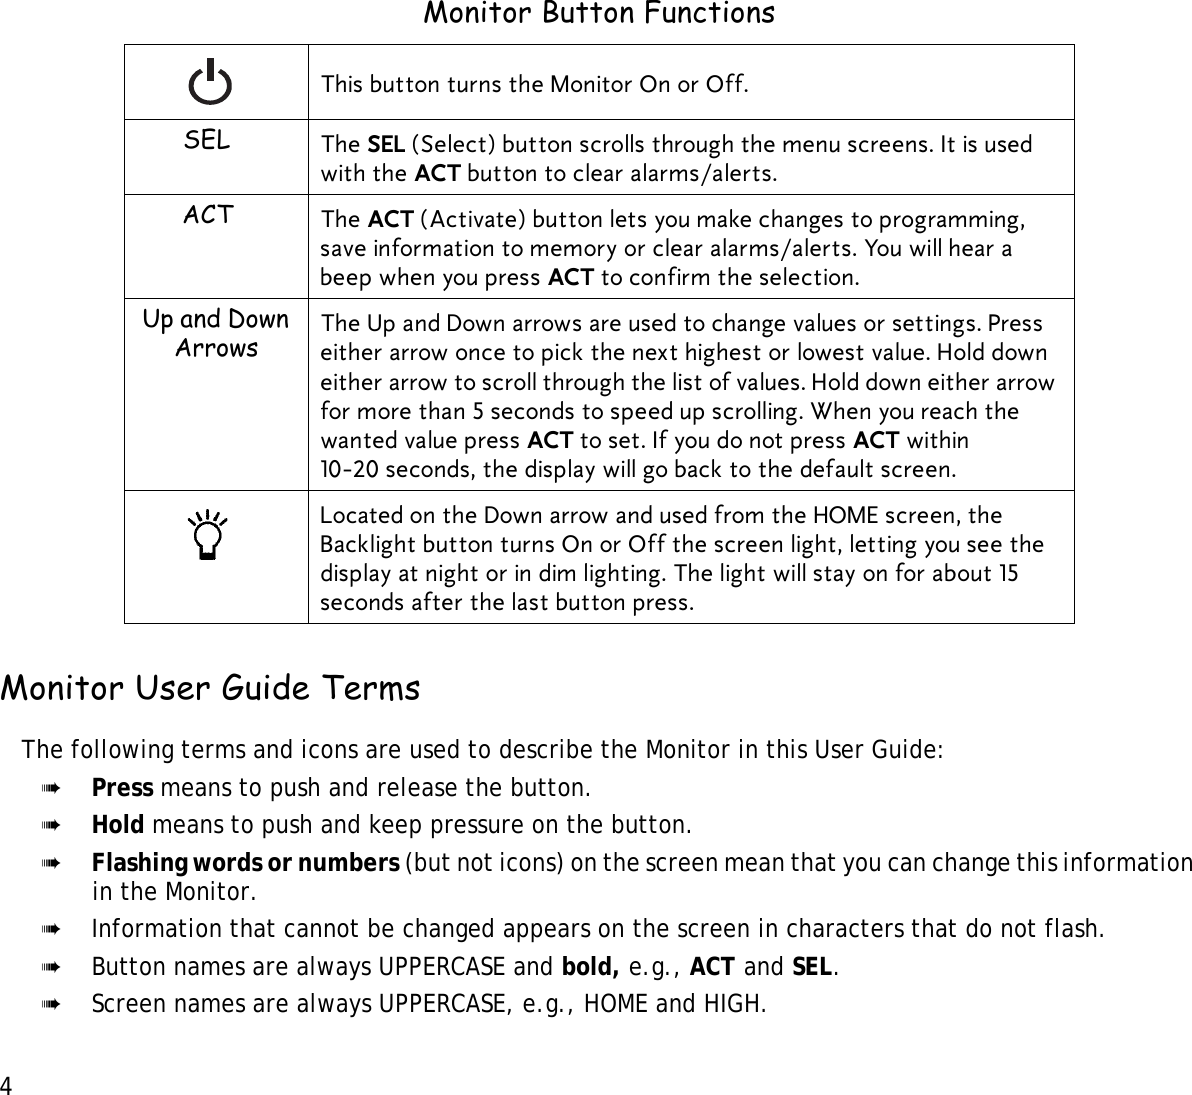 4 Monitor User Guide TermsThe following terms and icons are used to describe the Monitor in this User Guide: ➠Press means to push and release the button.➠Hold means to push and keep pressure on the button.➠Flashing words or numbers (but not icons) on the screen mean that you can change this information in the Monitor.➠Information that cannot be changed appears on the screen in characters that do not flash. ➠Button names are always UPPERCASE and bold, e.g., ACT and SEL. ➠Screen names are always UPPERCASE, e.g., HOME and HIGH.Monitor Button FunctionsThis button turns the Monitor On or Off.SEL The SEL (Select) button scrolls through the menu screens. It is used with the ACT button to clear alarms/alerts.ACT The ACT (Activate) button lets you make changes to programming, save information to memory or clear alarms/alerts. You will hear a beep when you press ACT to confirm the selection.Up and Down Arrows The Up and Down arrows are used to change values or settings. Press either arrow once to pick the next highest or lowest value. Hold down either arrow to scroll through the list of values. Hold down either arrow for more than 5 seconds to speed up scrolling. When you reach the wanted value press ACT to set. If you do not press ACT within 10-20 seconds, the display will go back to the default screen.Located on the Down arrow and used from the HOME screen, the Backlight button turns On or Off the screen light, letting you see the display at night or in dim lighting. The light will stay on for about 15 seconds after the last button press. 